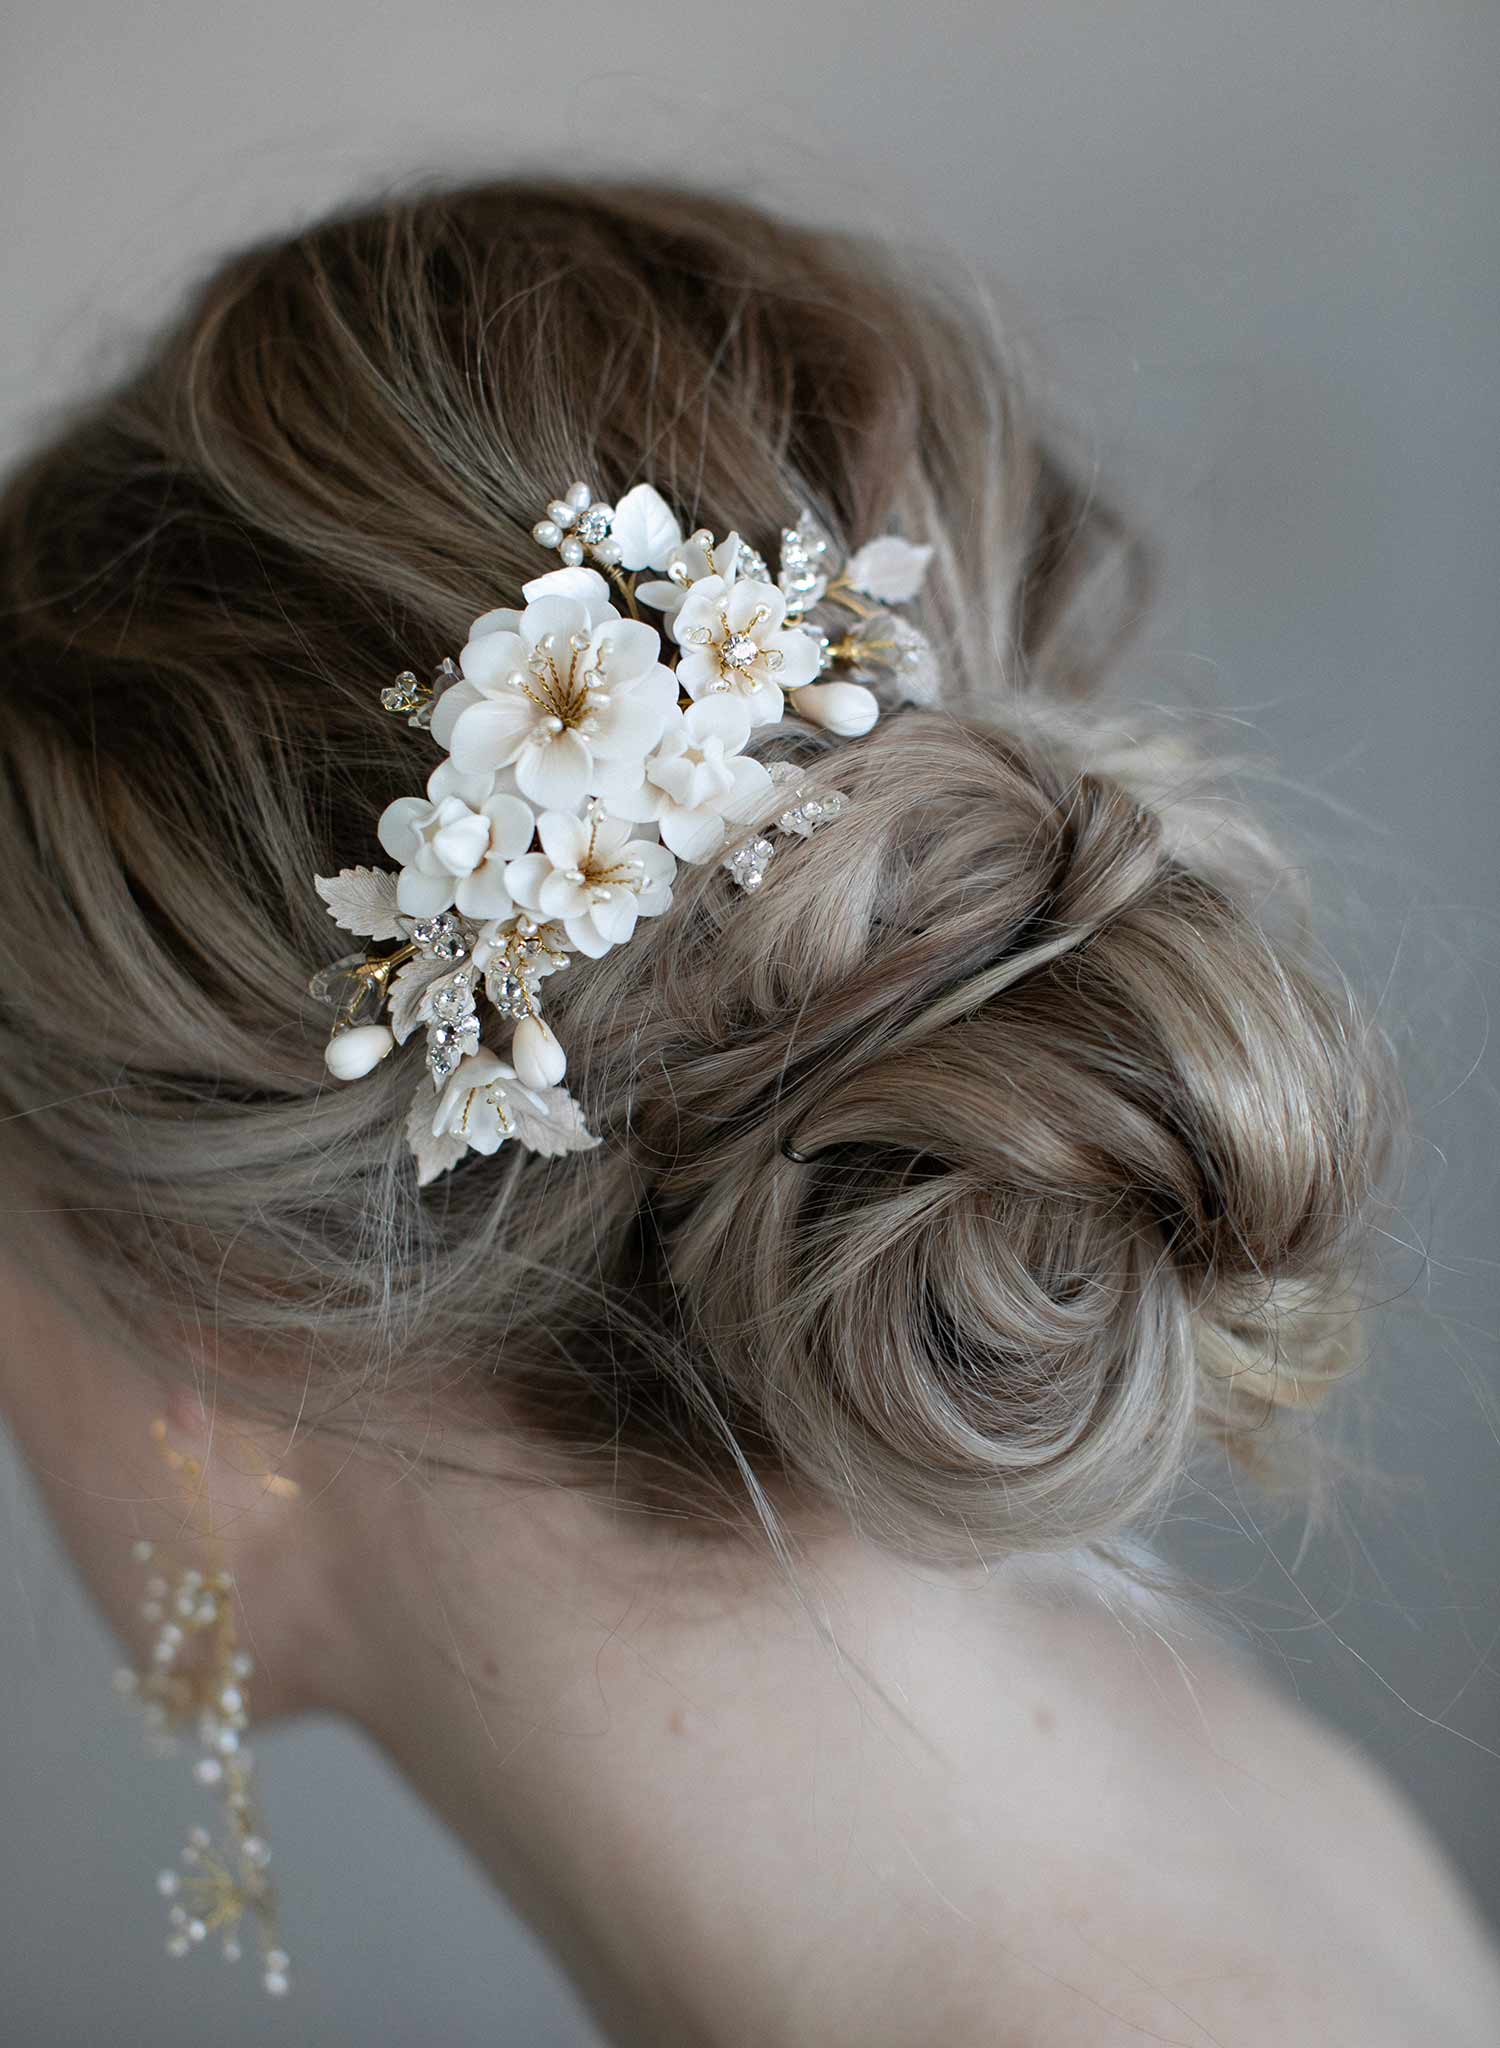 Bridal headpiece, hair accessory with flowers - Double flower and pearl  spray hair comb - Style #977